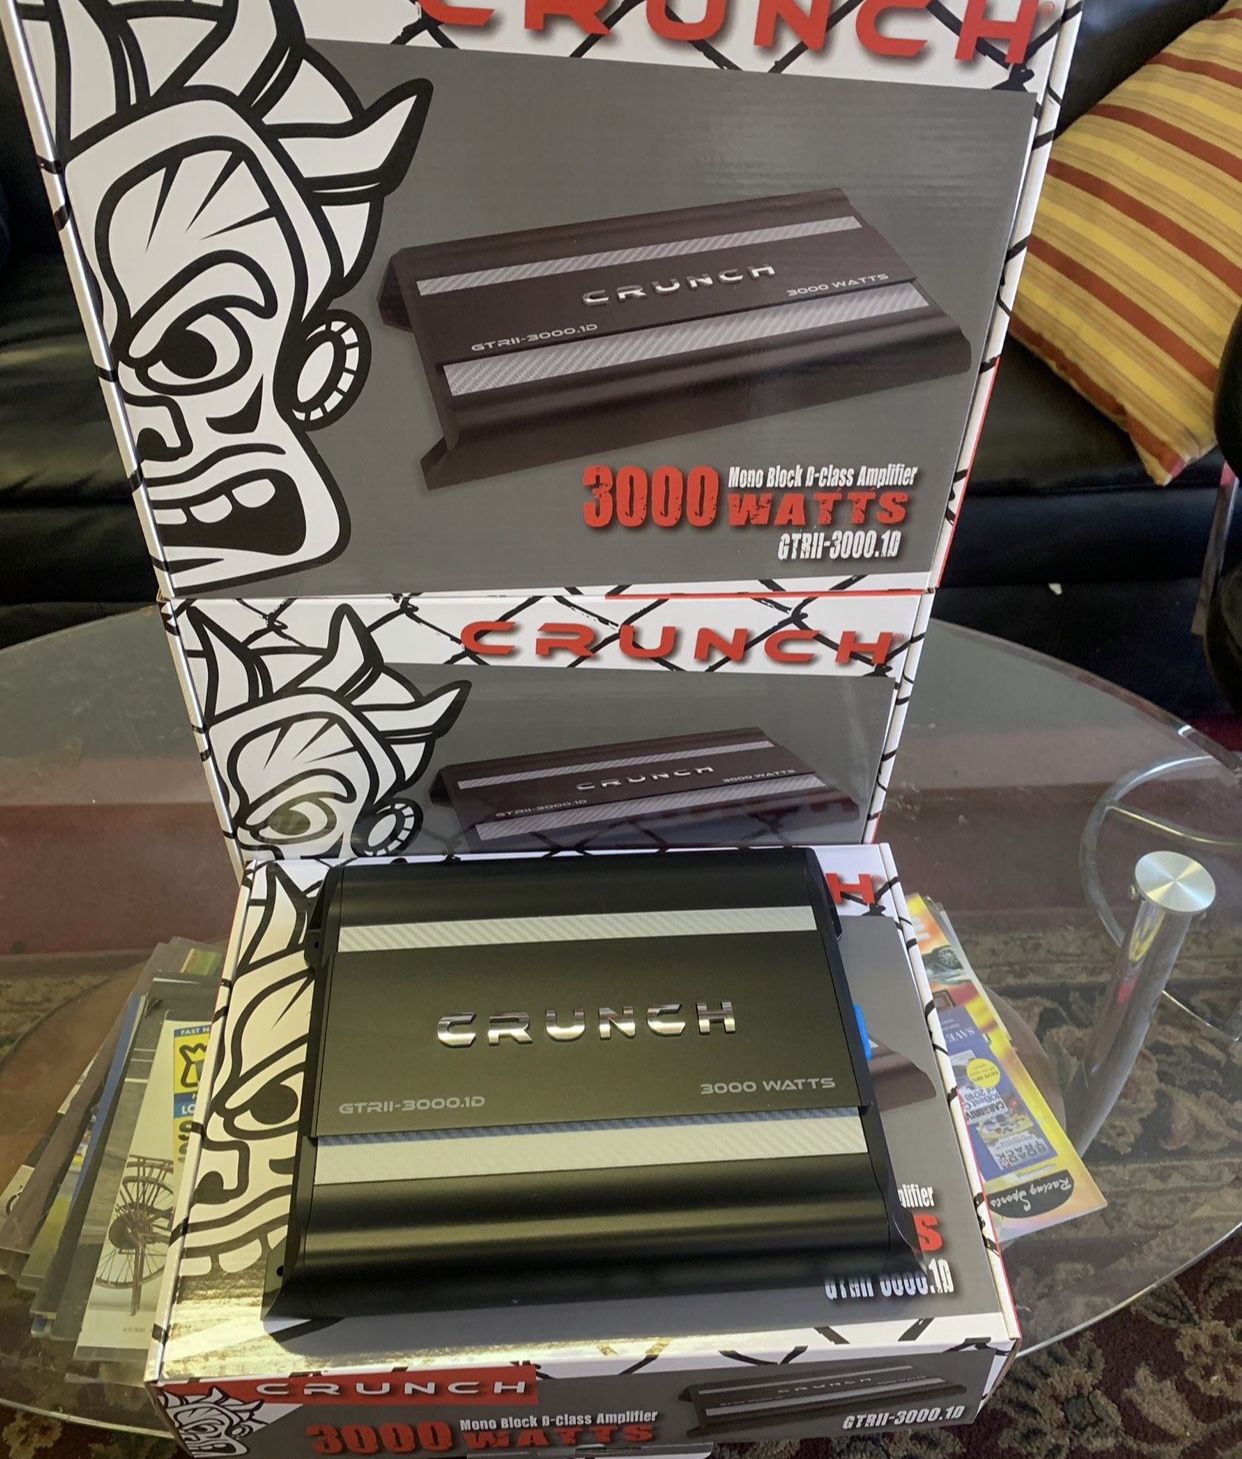 Crunch Car Audio Car Stereo Amplifier . 3000 watts Class D With Remote Bass Knob . New Years Flash Sale $99 While They Last . New